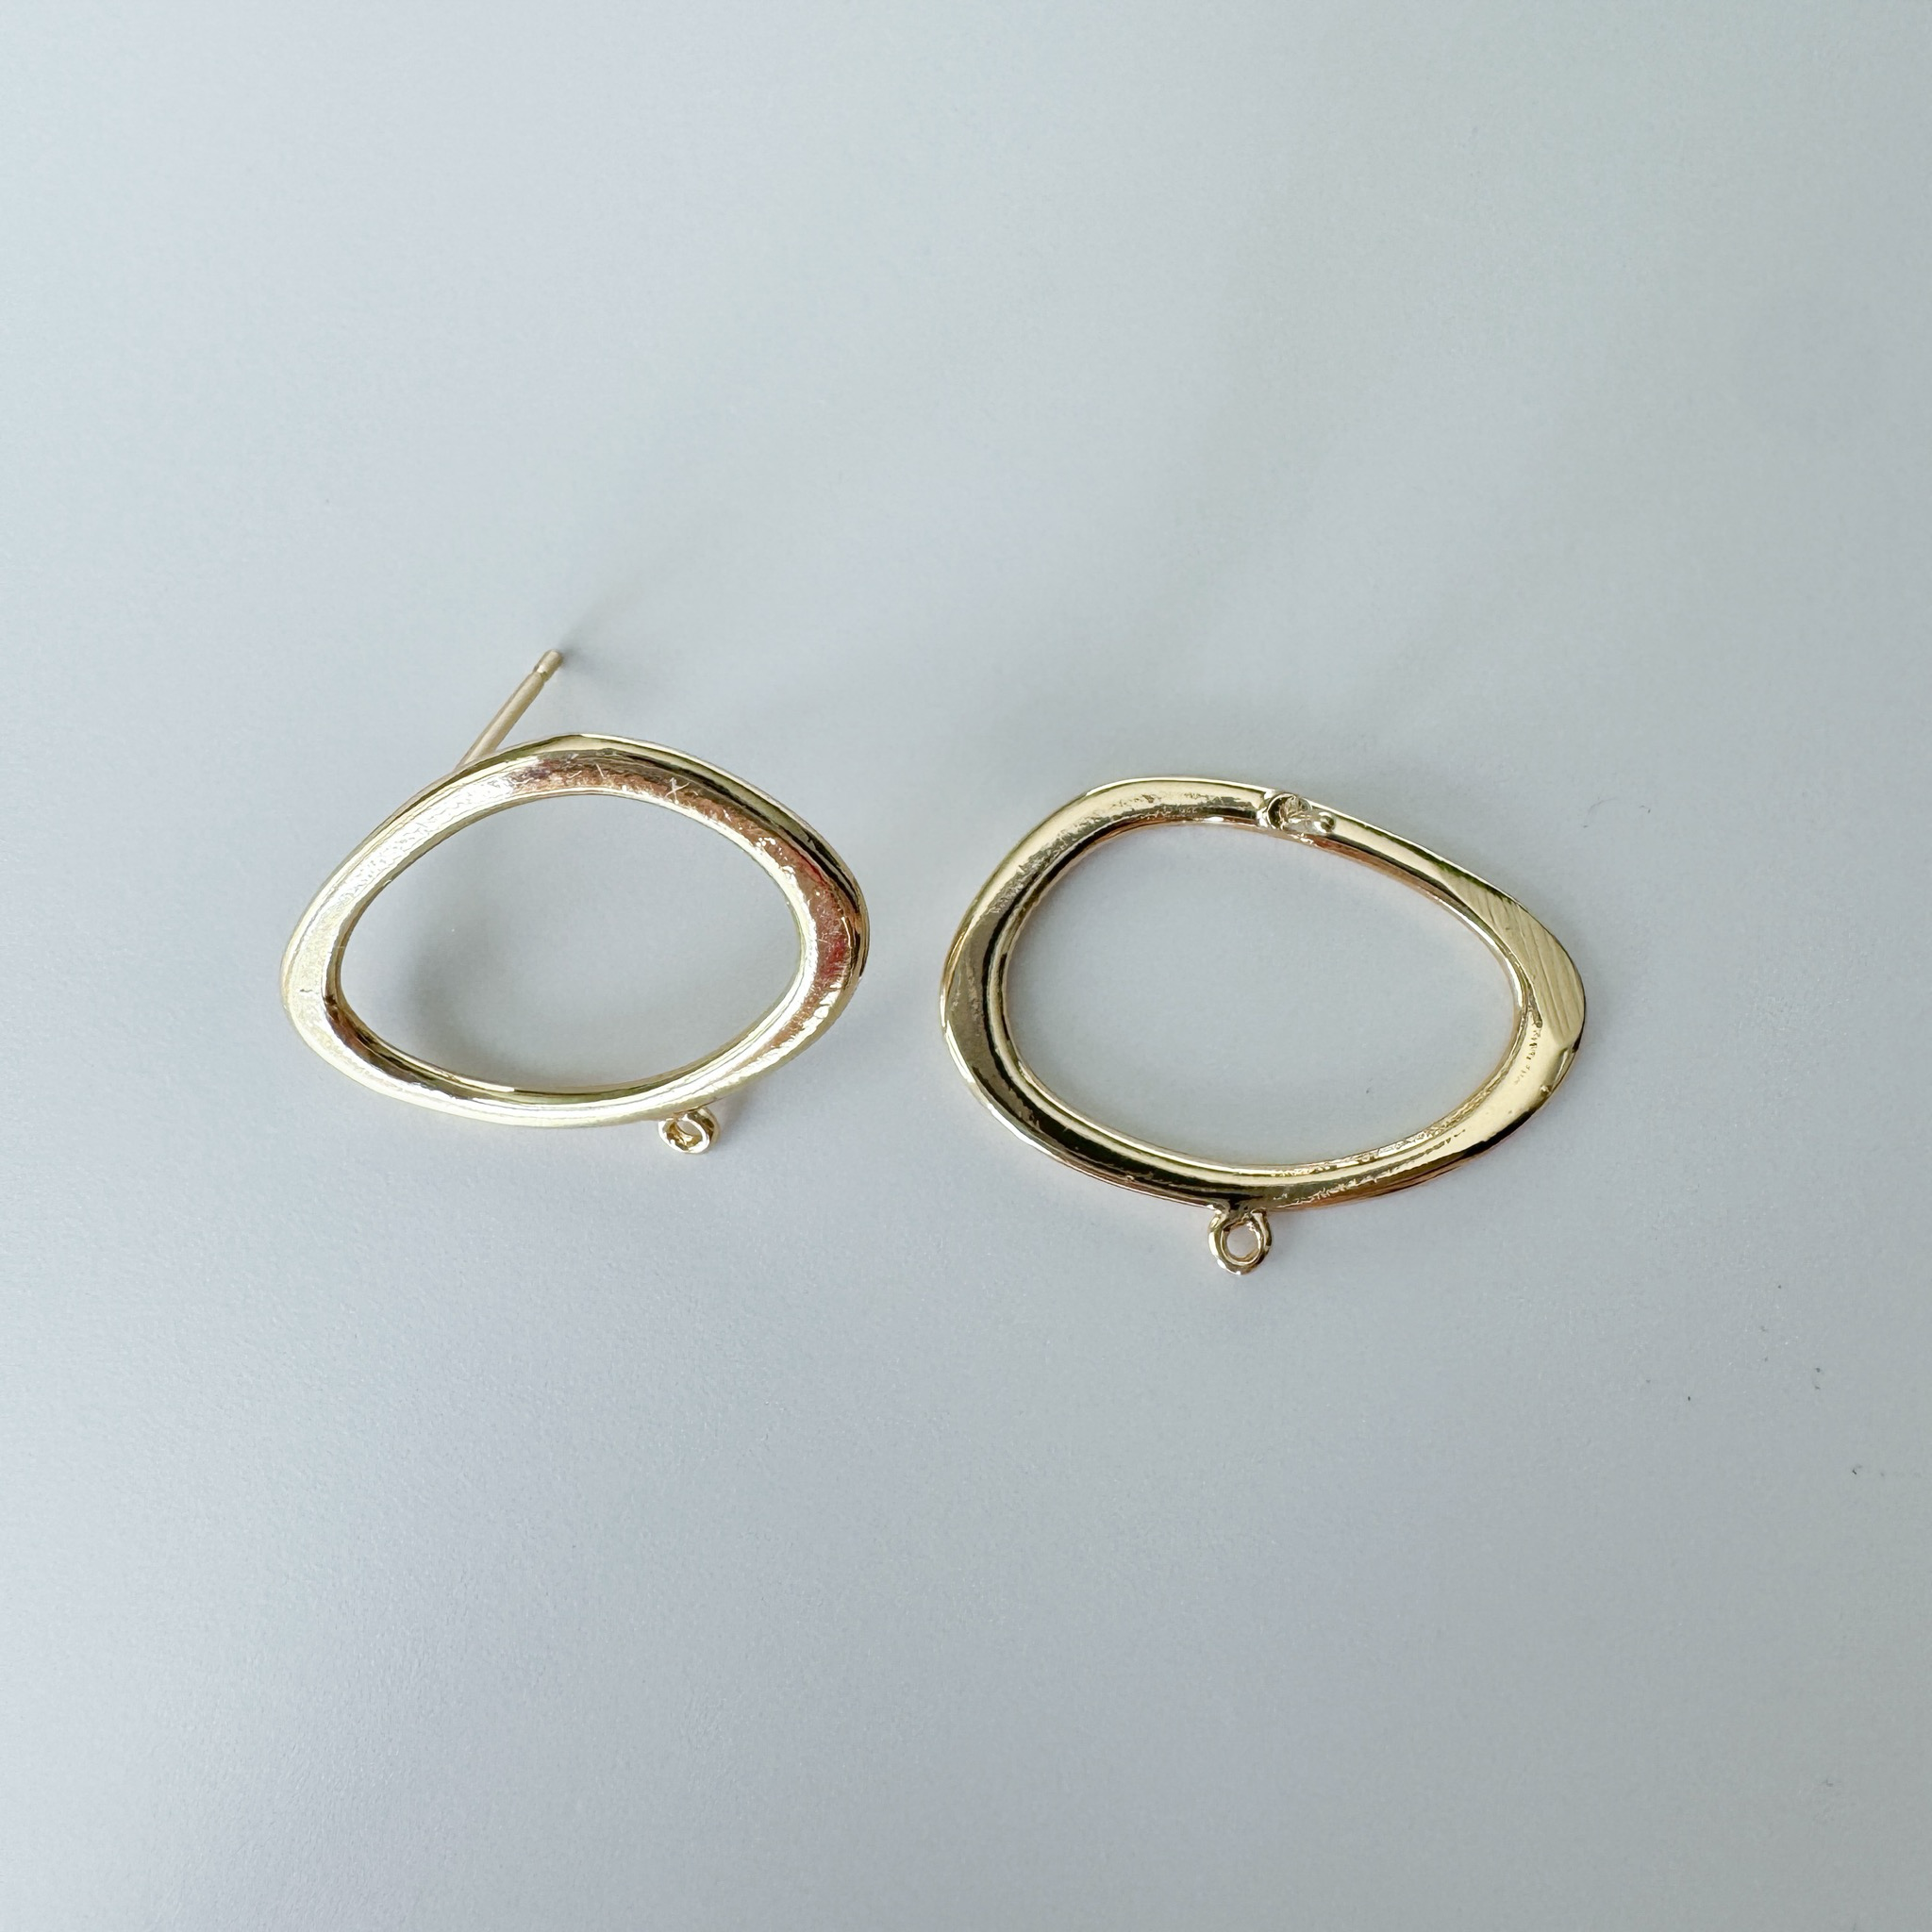 Brass Earring Stud with Zircon - Circle Earring Post - Brass Earring Charms  and earring connector - Earring findings for jewelry making-5530